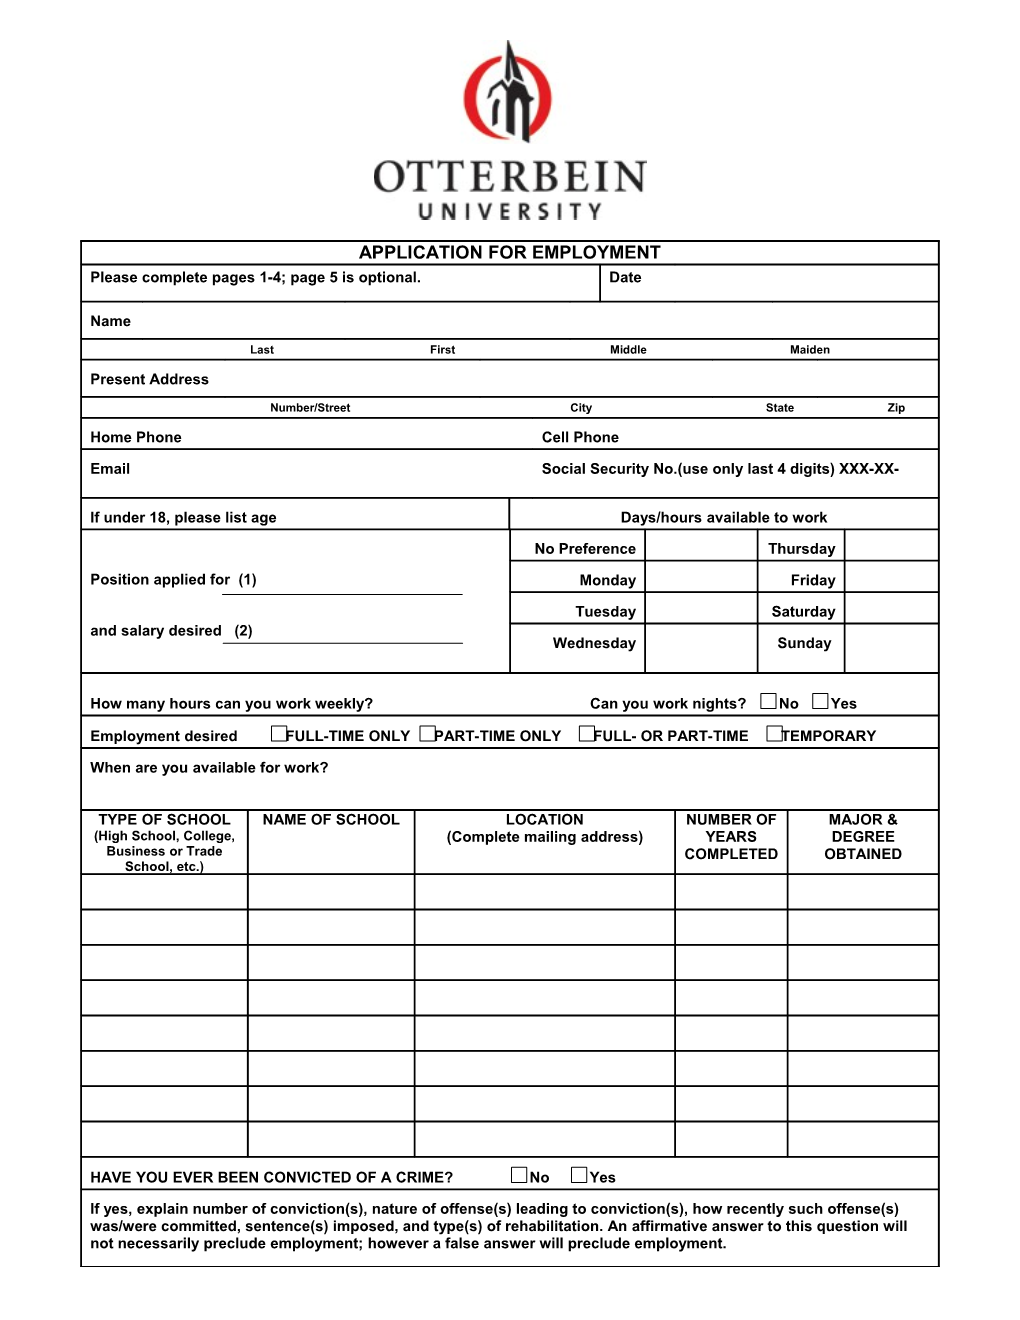 Sample Employment Application Form s2